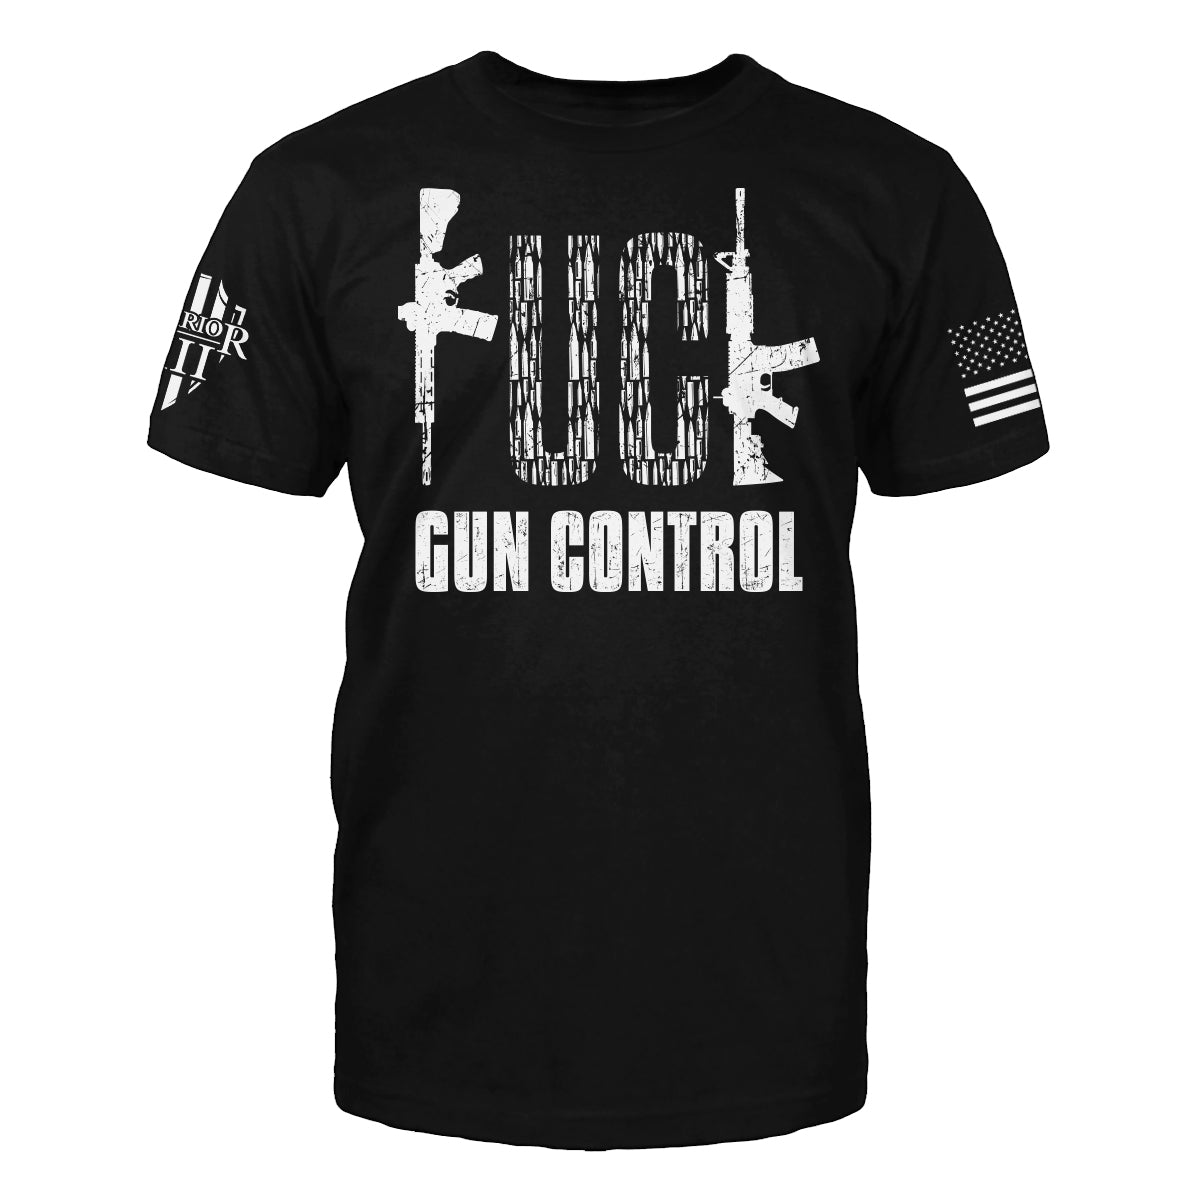 "Fck Gun Control" is printed on a Black t-shirt with the main design printed on the the front and the back of this t-shirt has no printing. This shirt features our brand logo on the right sleeve and the American Flag on the left sleeve.